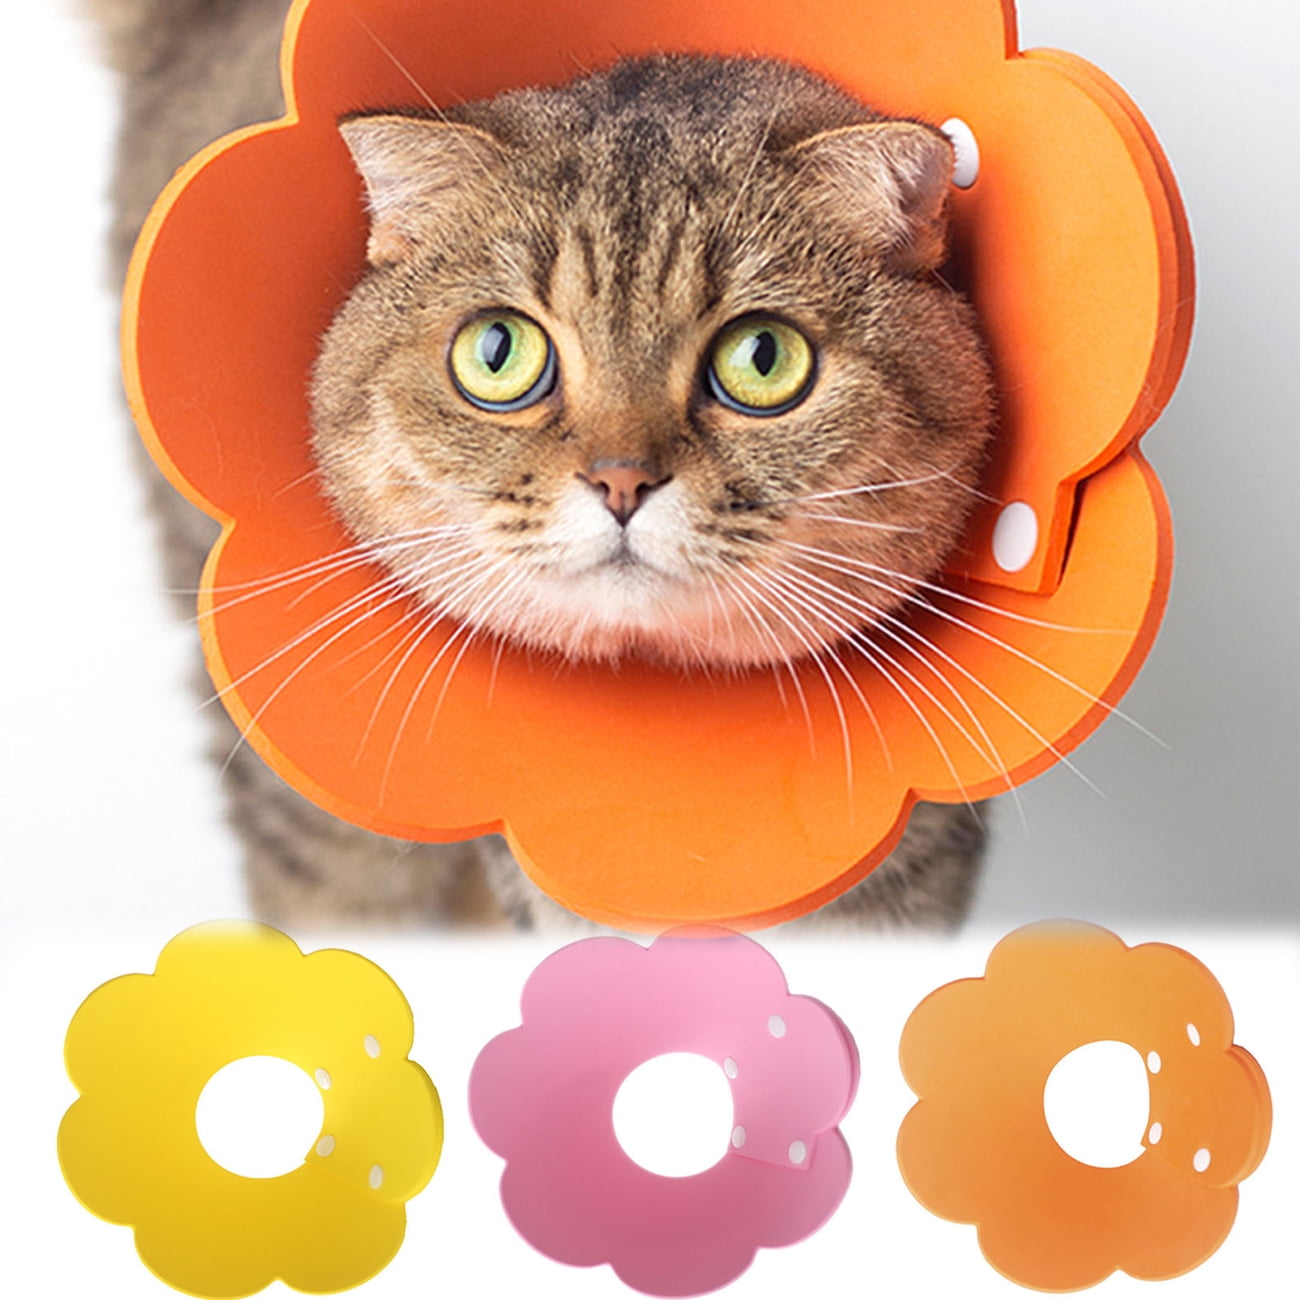 MICOOYO Cat Collar Soft Cone Recovery Adjustable for Cat’s Head Wound Healing Protective Cone After Surgery Elizabethan Collars for Pets Kitten and Small Dogs 